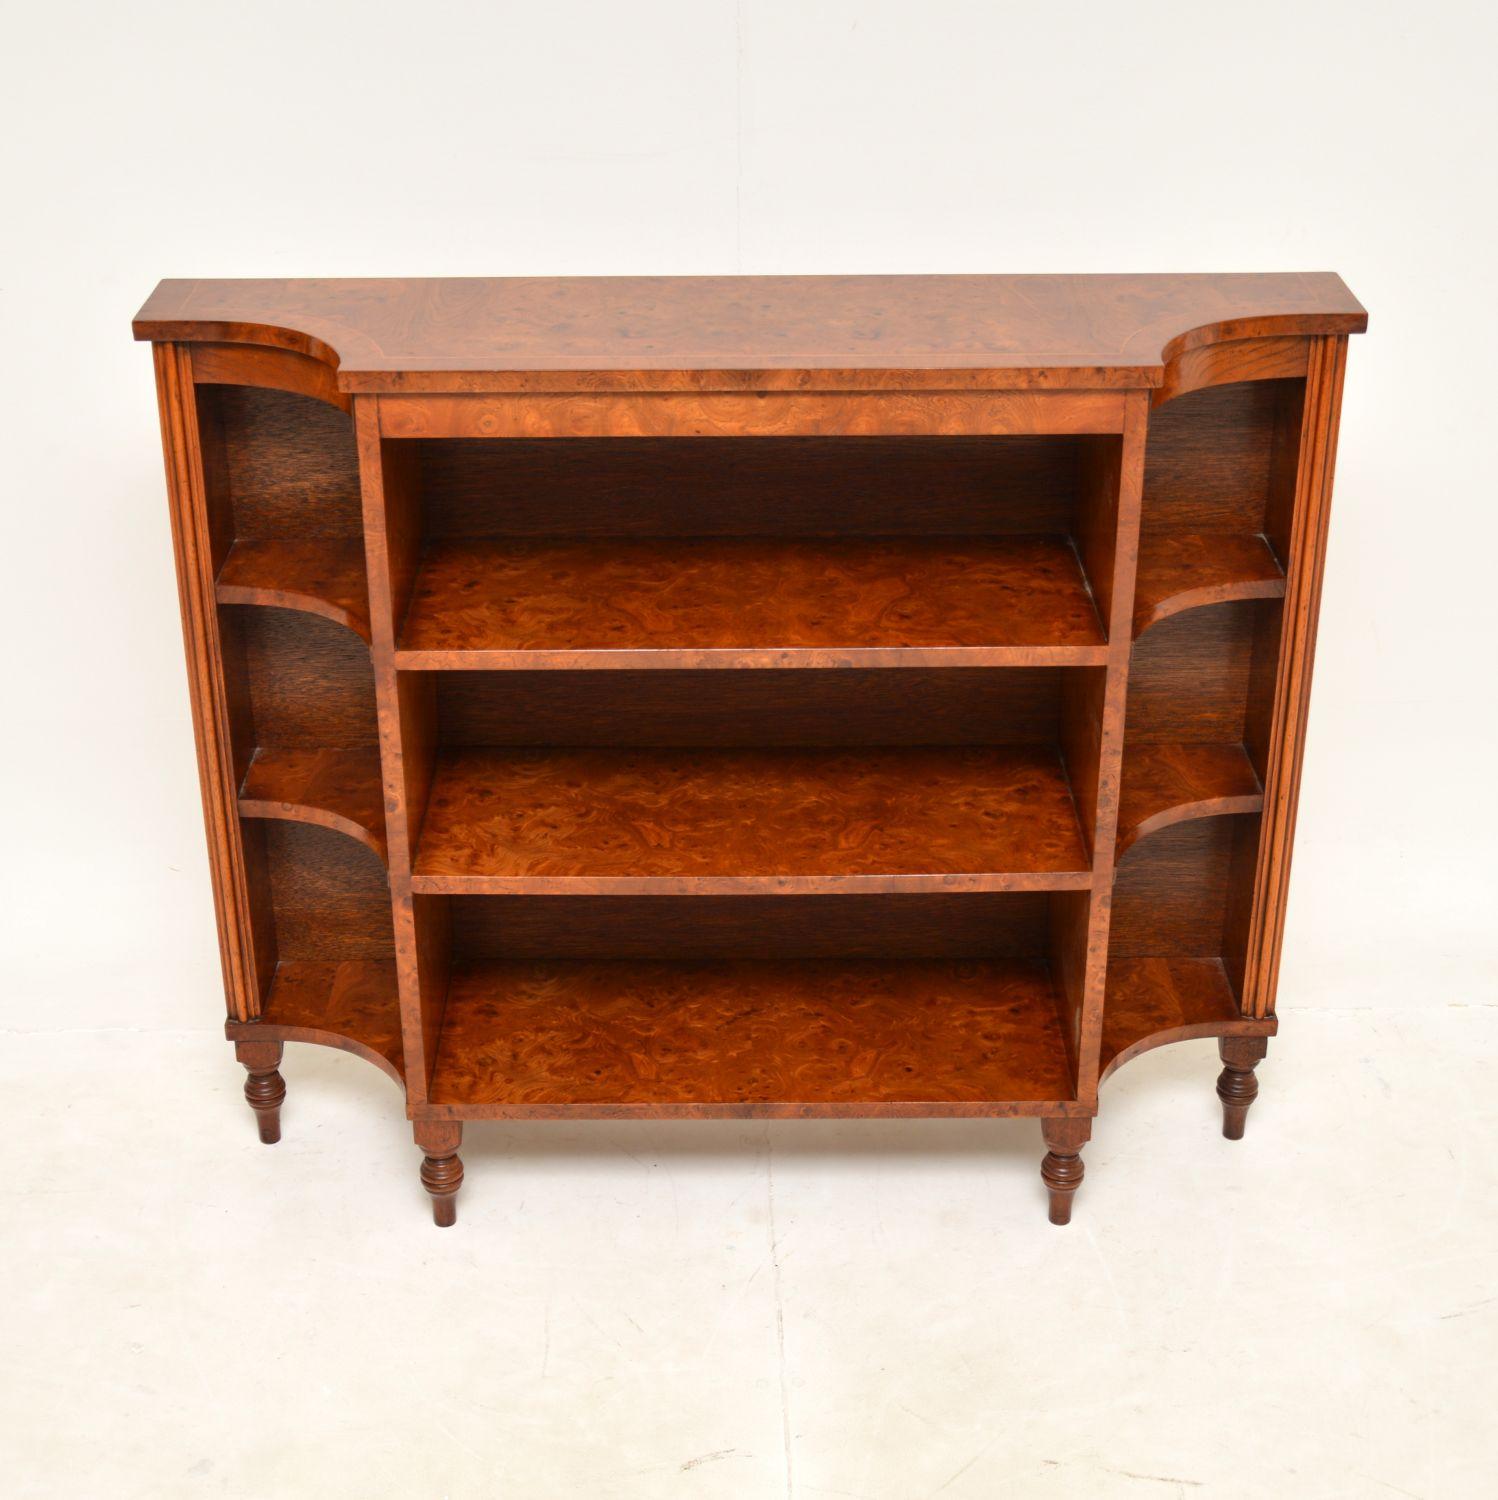 A very smart and stylish antique Regency style open bookcase in elm. This was made in England, it dates from around the 1950’s.

It is of superb quality and is a very useful item. The burr elm grain patterns are absolutely stunning, this sits on